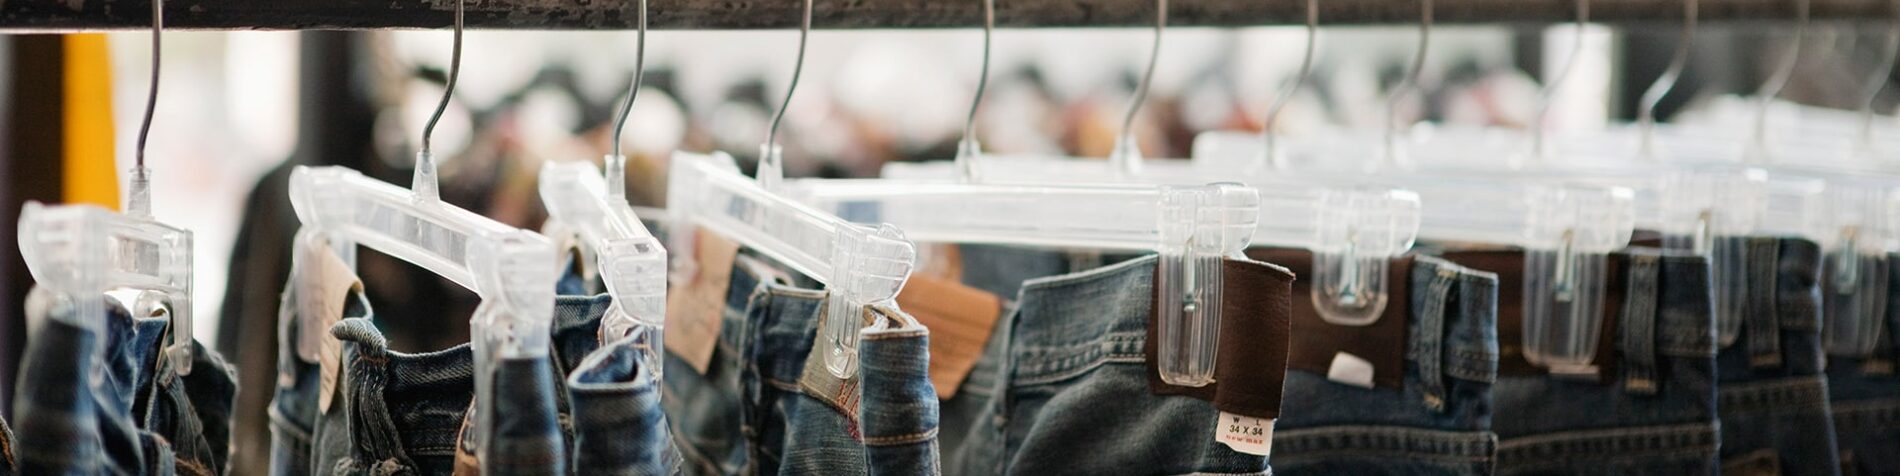 It’s No Dream, Sustainable Jeans Are Perfect Fit for Modern Retail Consumers